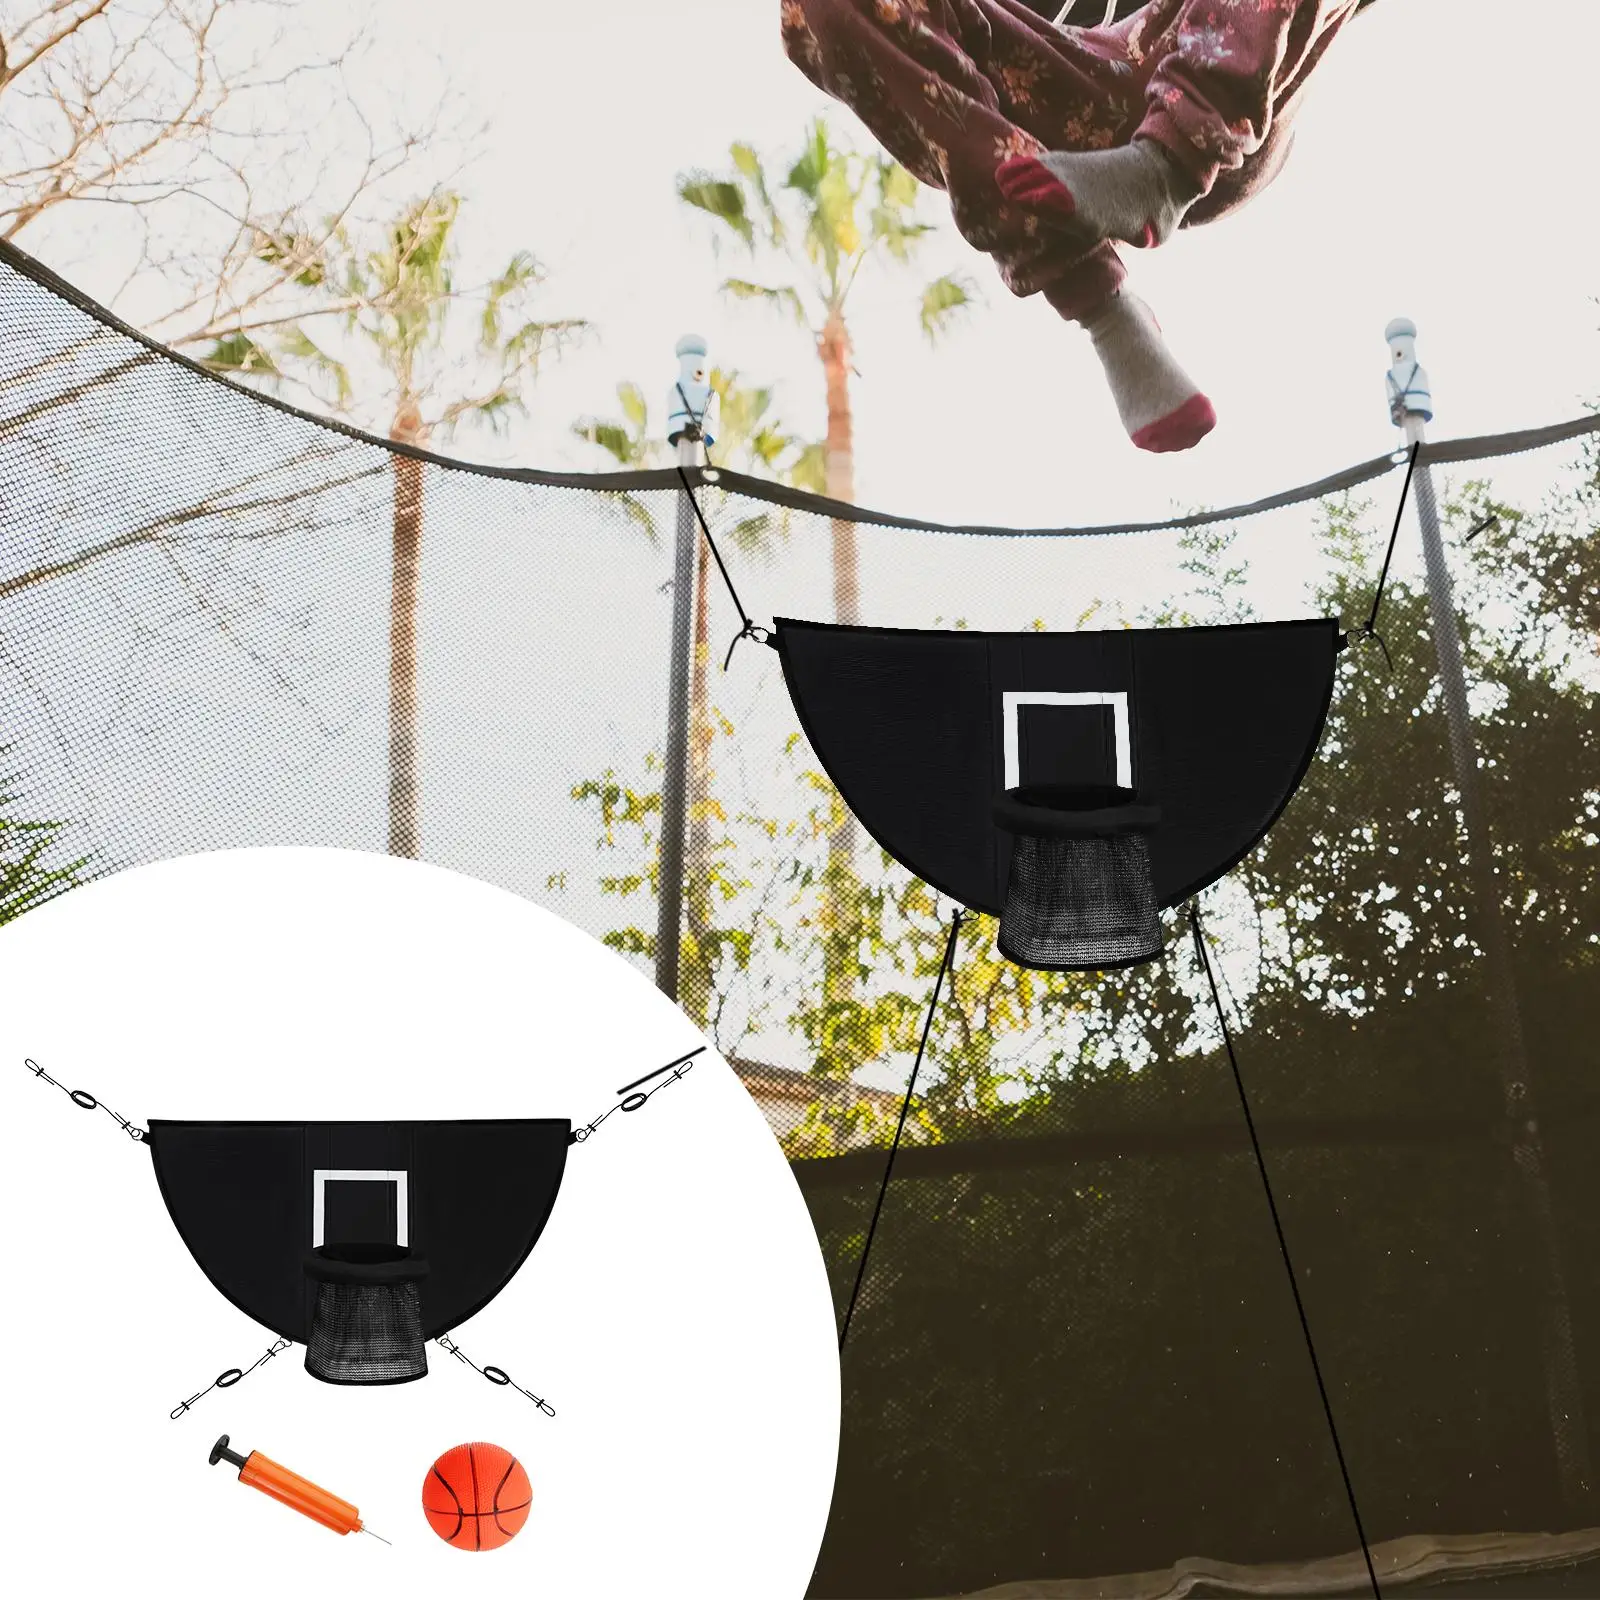 Trampoline Basketball Hoop for Outdoor Trampoline Attachment Accessory